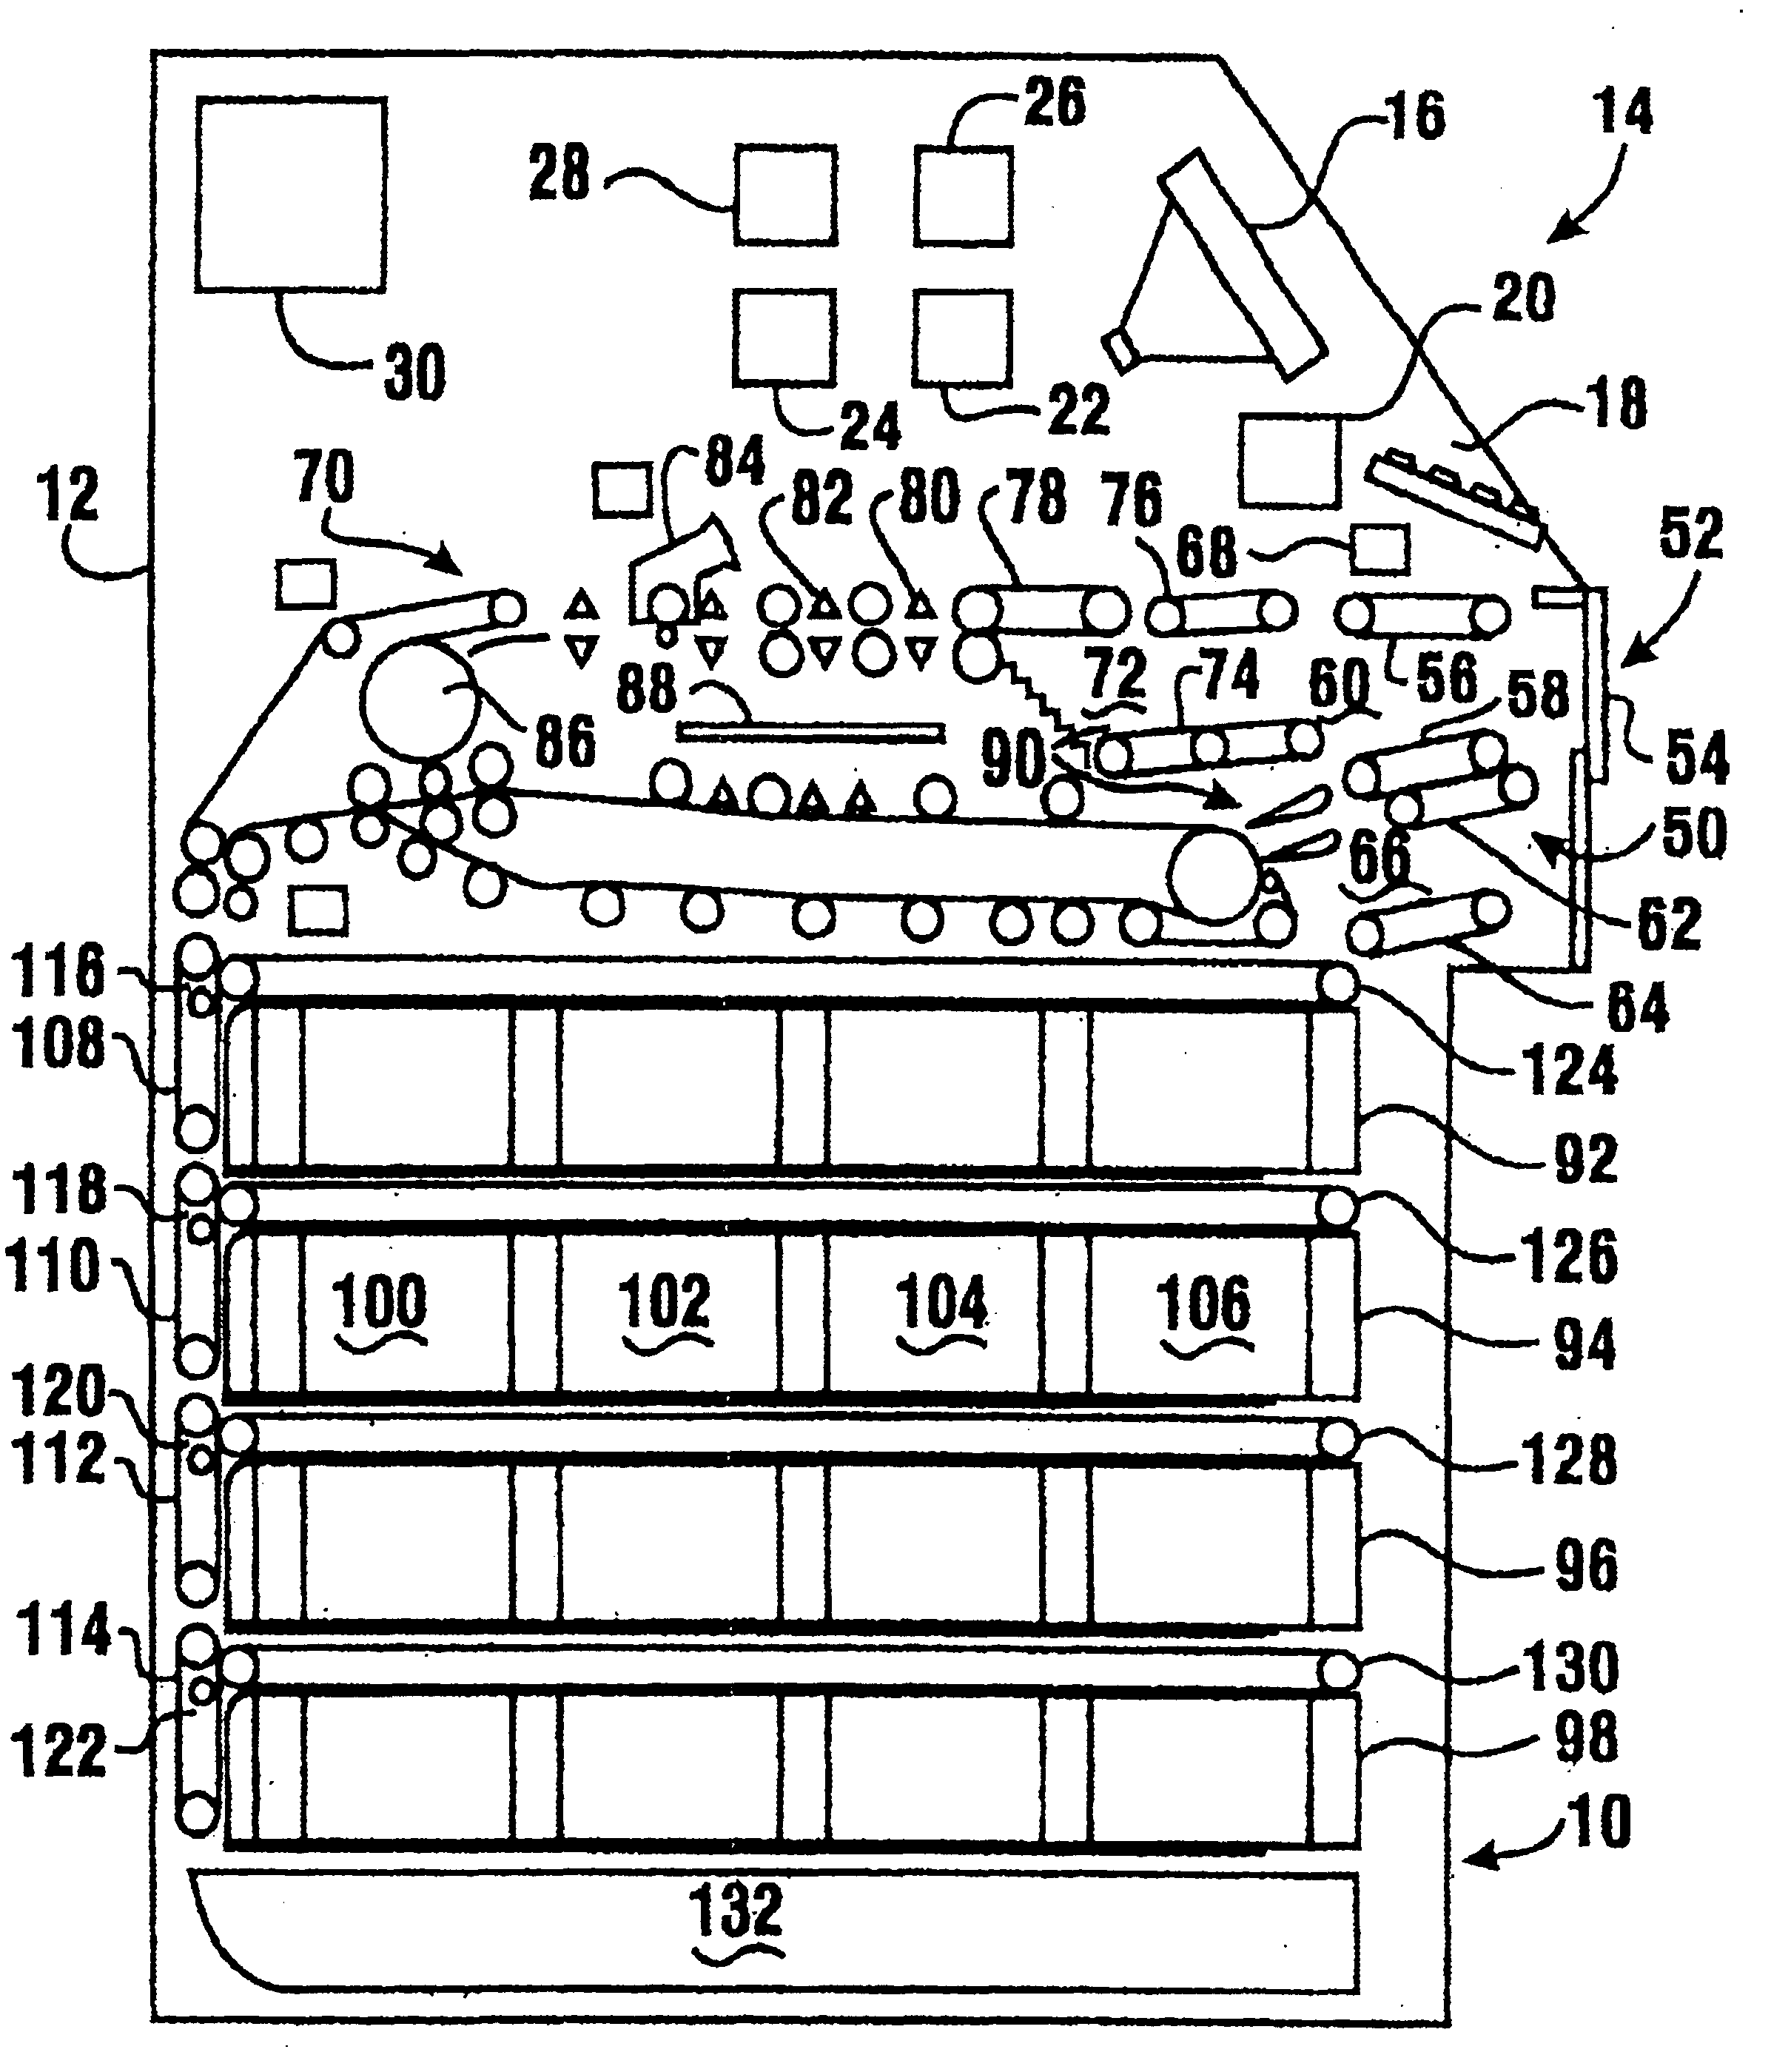 Document alignment mechanism for currency recycling automated banking machine